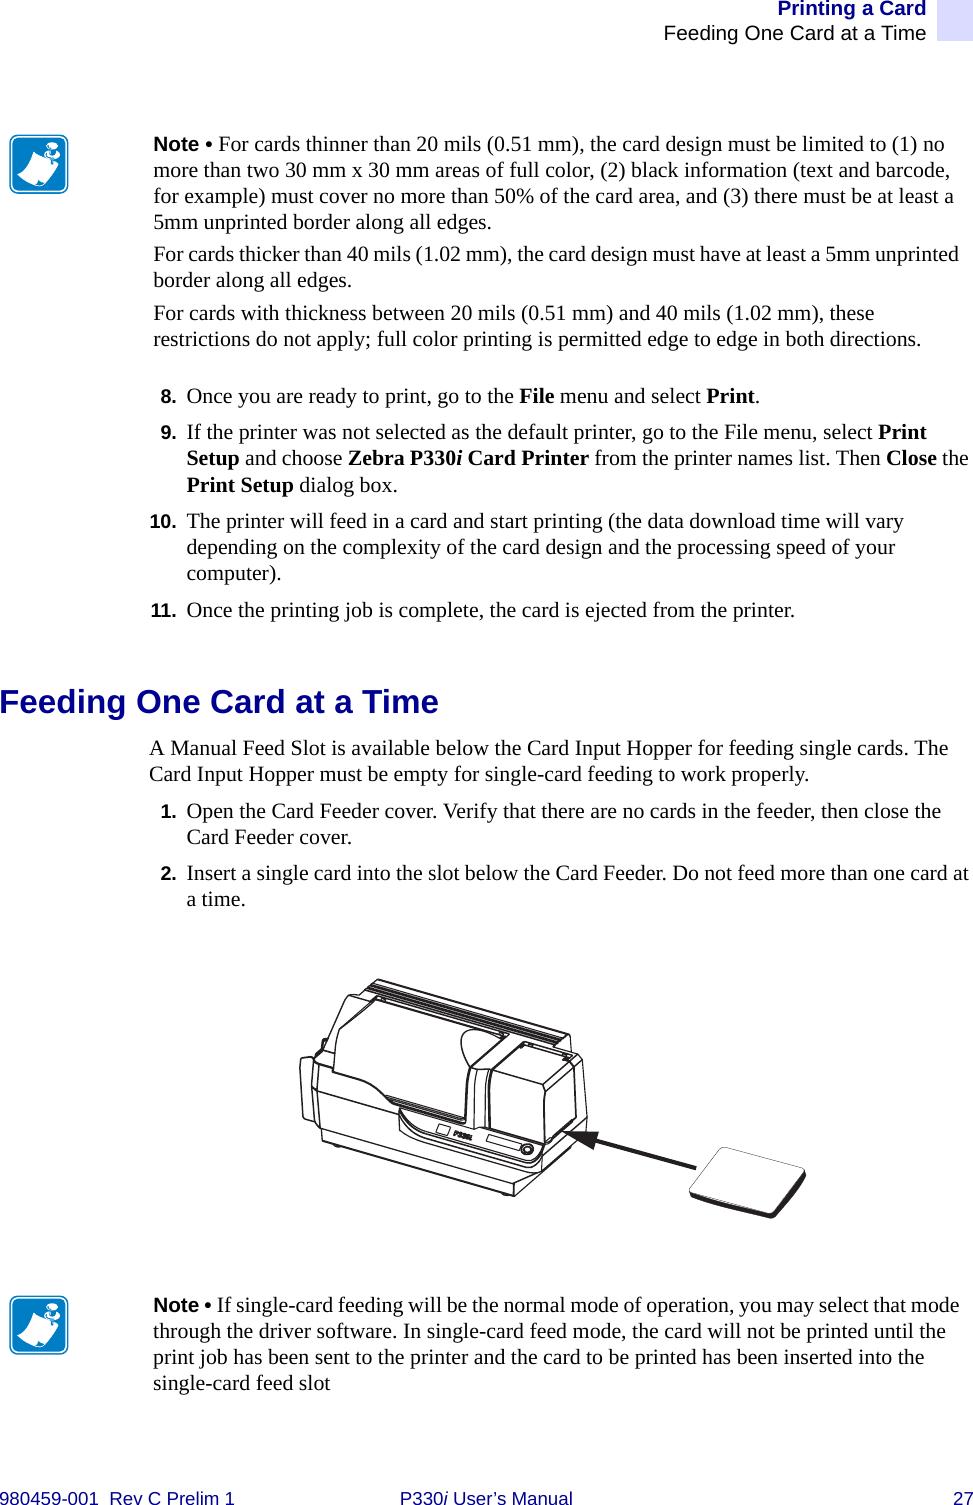 Printing a CardFeeding One Card at a Time980459-001  Rev C Prelim 1 P330i User’s Manual 278. Once you are ready to print, go to the File menu and select Print.9. If the printer was not selected as the default printer, go to the File menu, select Print Setup and choose Zebra P330i Card Printer from the printer names list. Then Close the Print Setup dialog box.10. The printer will feed in a card and start printing (the data download time will vary depending on the complexity of the card design and the processing speed of your computer).11. Once the printing job is complete, the card is ejected from the printer.Feeding One Card at a TimeA Manual Feed Slot is available below the Card Input Hopper for feeding single cards. The Card Input Hopper must be empty for single-card feeding to work properly.1. Open the Card Feeder cover. Verify that there are no cards in the feeder, then close the Card Feeder cover.2. Insert a single card into the slot below the Card Feeder. Do not feed more than one card at a time.Note • For cards thinner than 20 mils (0.51 mm), the card design must be limited to (1) no more than two 30 mm x 30 mm areas of full color, (2) black information (text and barcode, for example) must cover no more than 50% of the card area, and (3) there must be at least a 5mm unprinted border along all edges.For cards thicker than 40 mils (1.02 mm), the card design must have at least a 5mm unprinted border along all edges.For cards with thickness between 20 mils (0.51 mm) and 40 mils (1.02 mm), these restrictions do not apply; full color printing is permitted edge to edge in both directions.Note • If single-card feeding will be the normal mode of operation, you may select that mode through the driver software. In single-card feed mode, the card will not be printed until the print job has been sent to the printer and the card to be printed has been inserted into the single-card feed slot